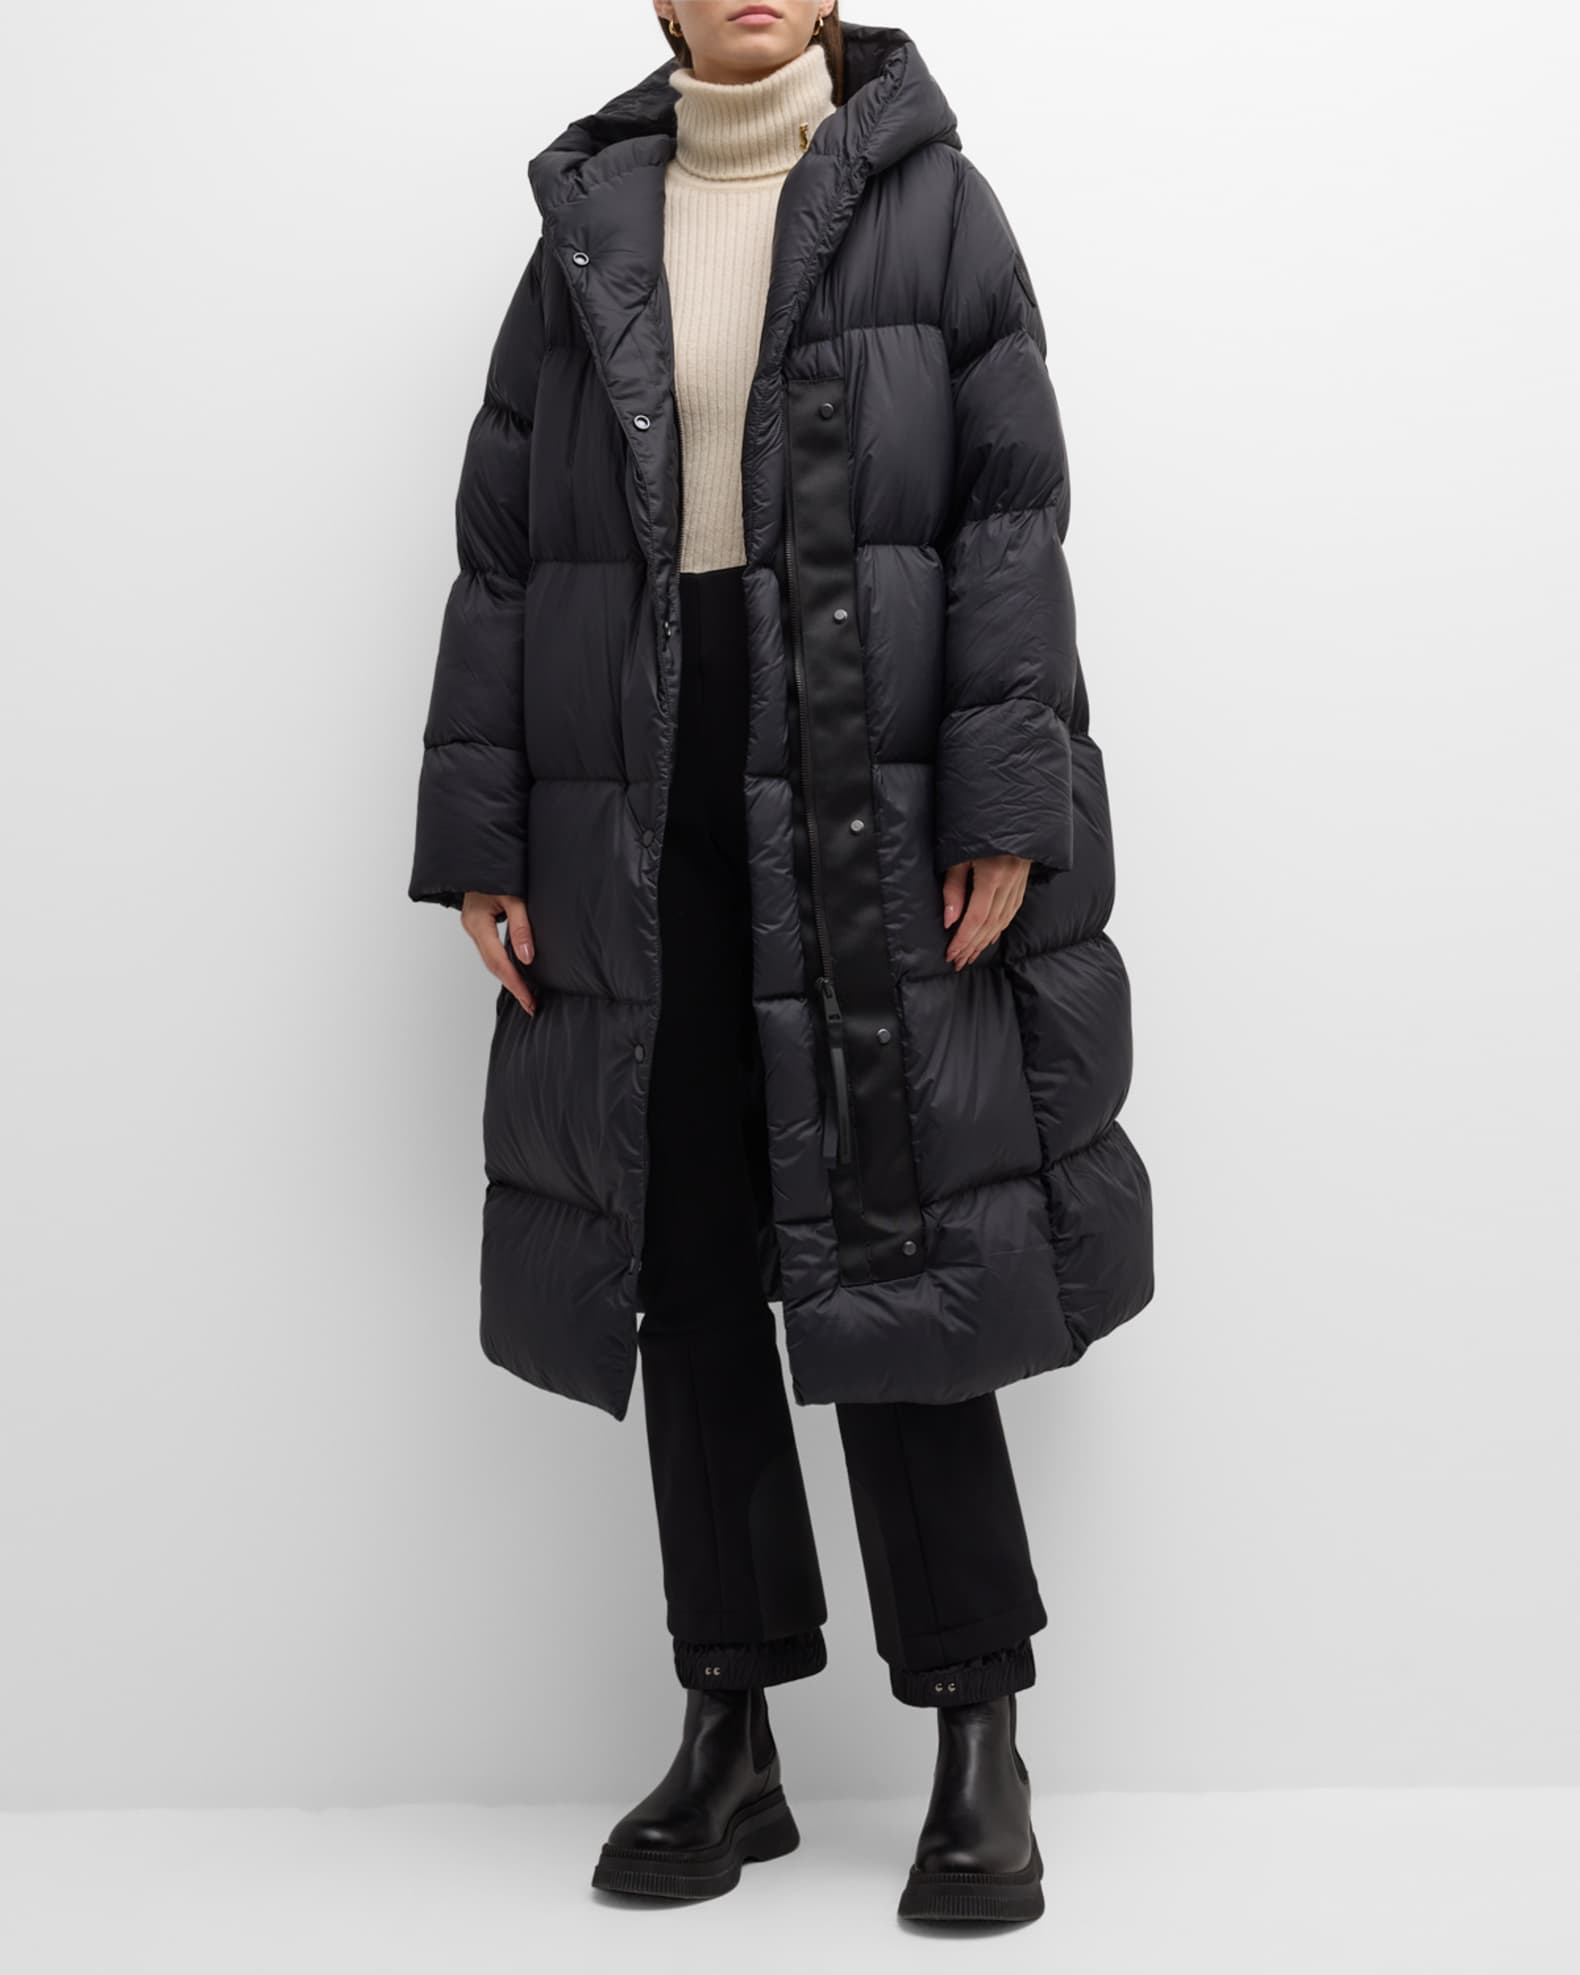 The Cube: Puffer Jackets, Trench Coats and Parkas